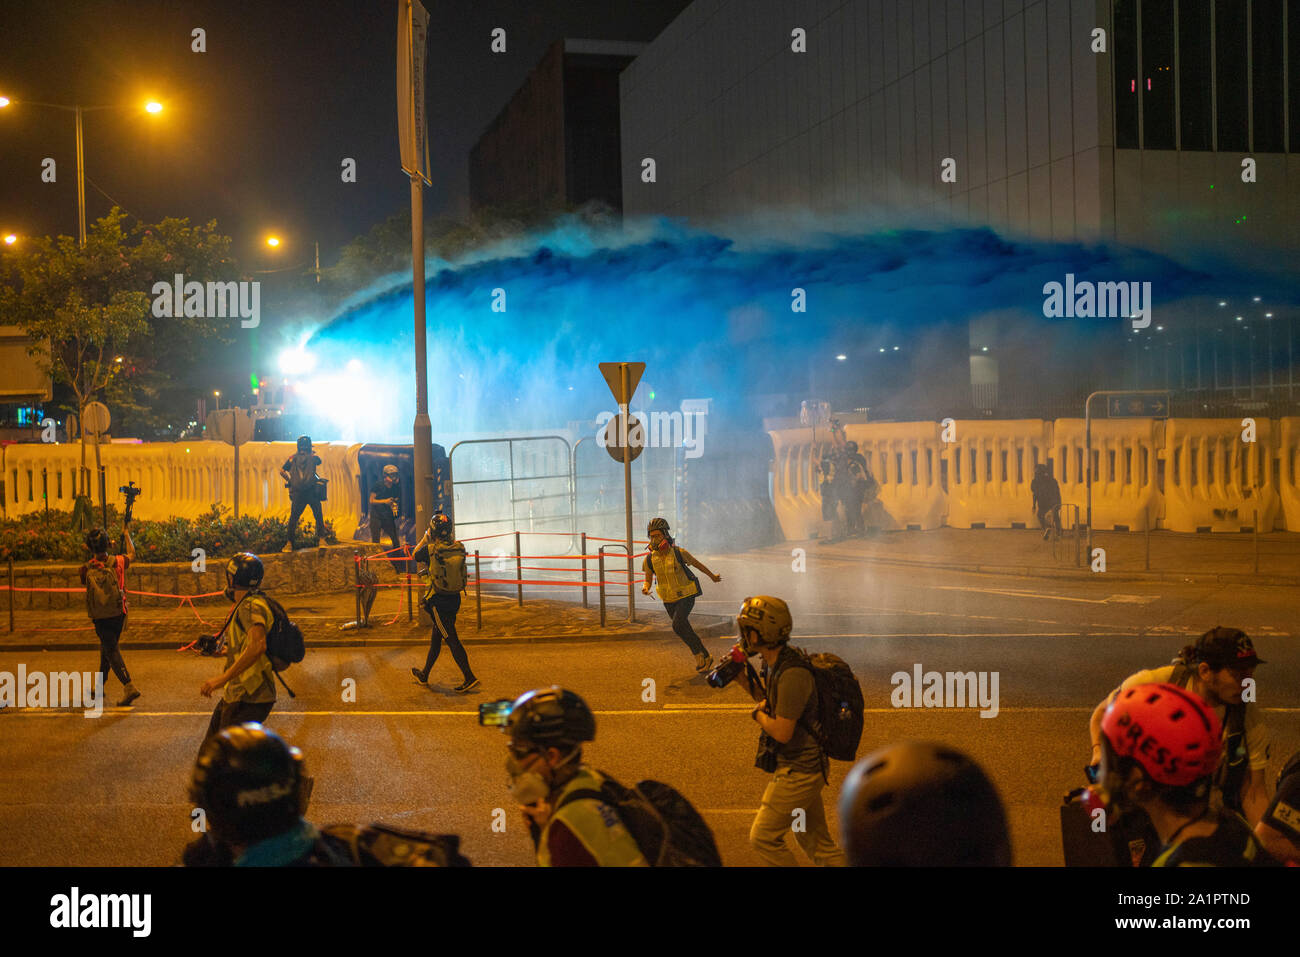 Hong Kong. 28 September 2019. Police fire water cannon at demonstrators outside the Government Headquarters at Tamar in Admiralty district of the city. The water is dyed blue and is laced with a stinging ingredient. Crowds had gathered at Tamar to commemorate 5th anniversary of Umbrella Movement. Small group of protestors provoked police away from the rally. Iain Masterton/Alamy Live News Stock Photo